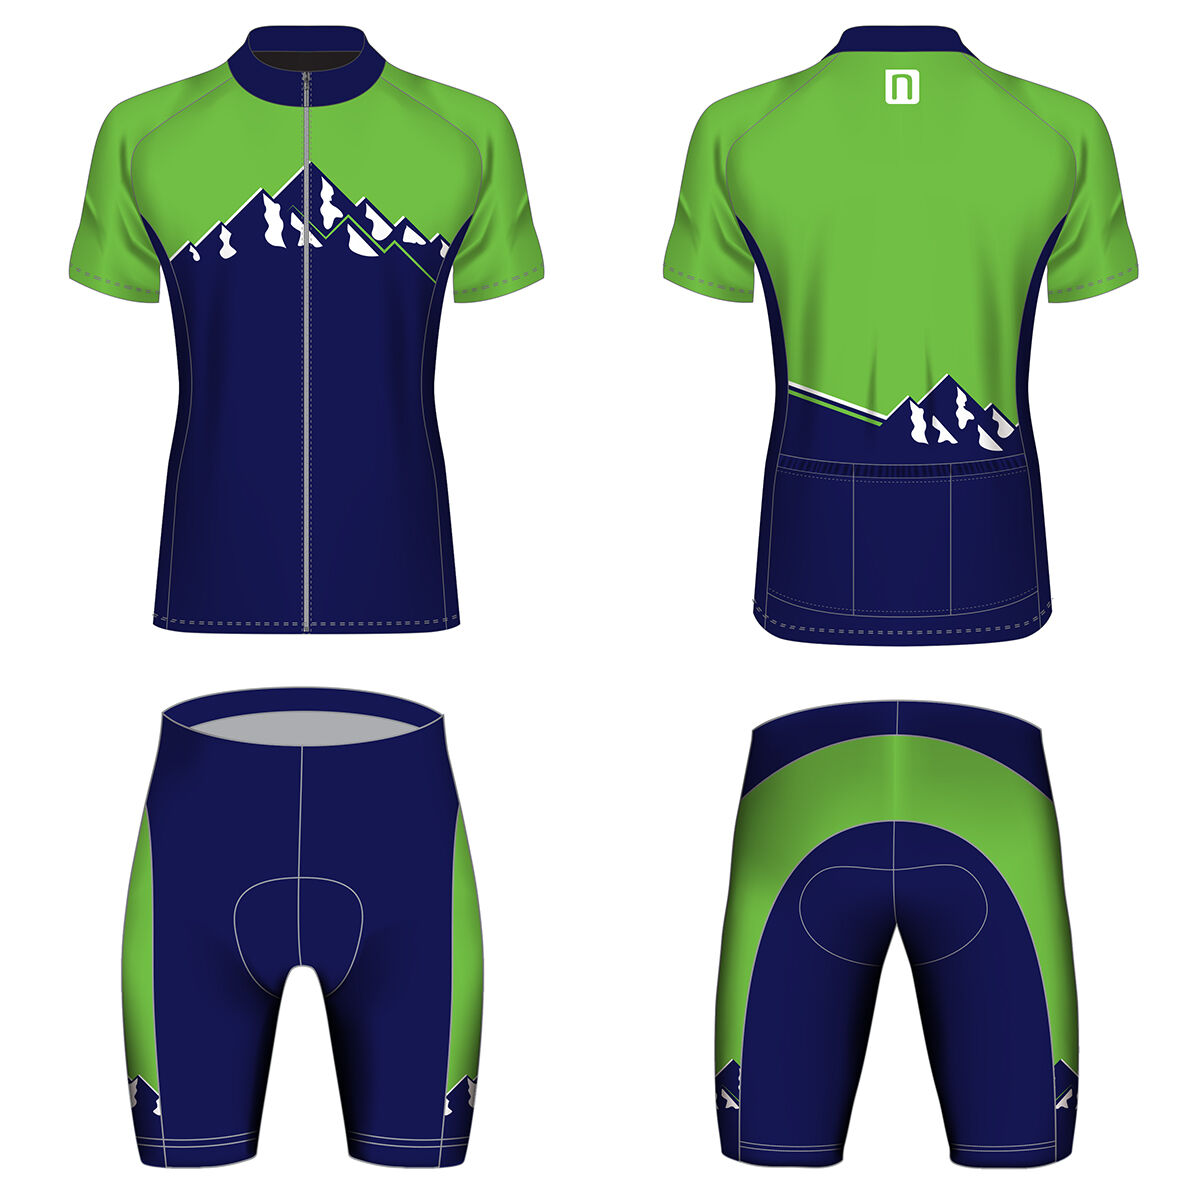 Personalised Cycle Jerseys No Sleeves